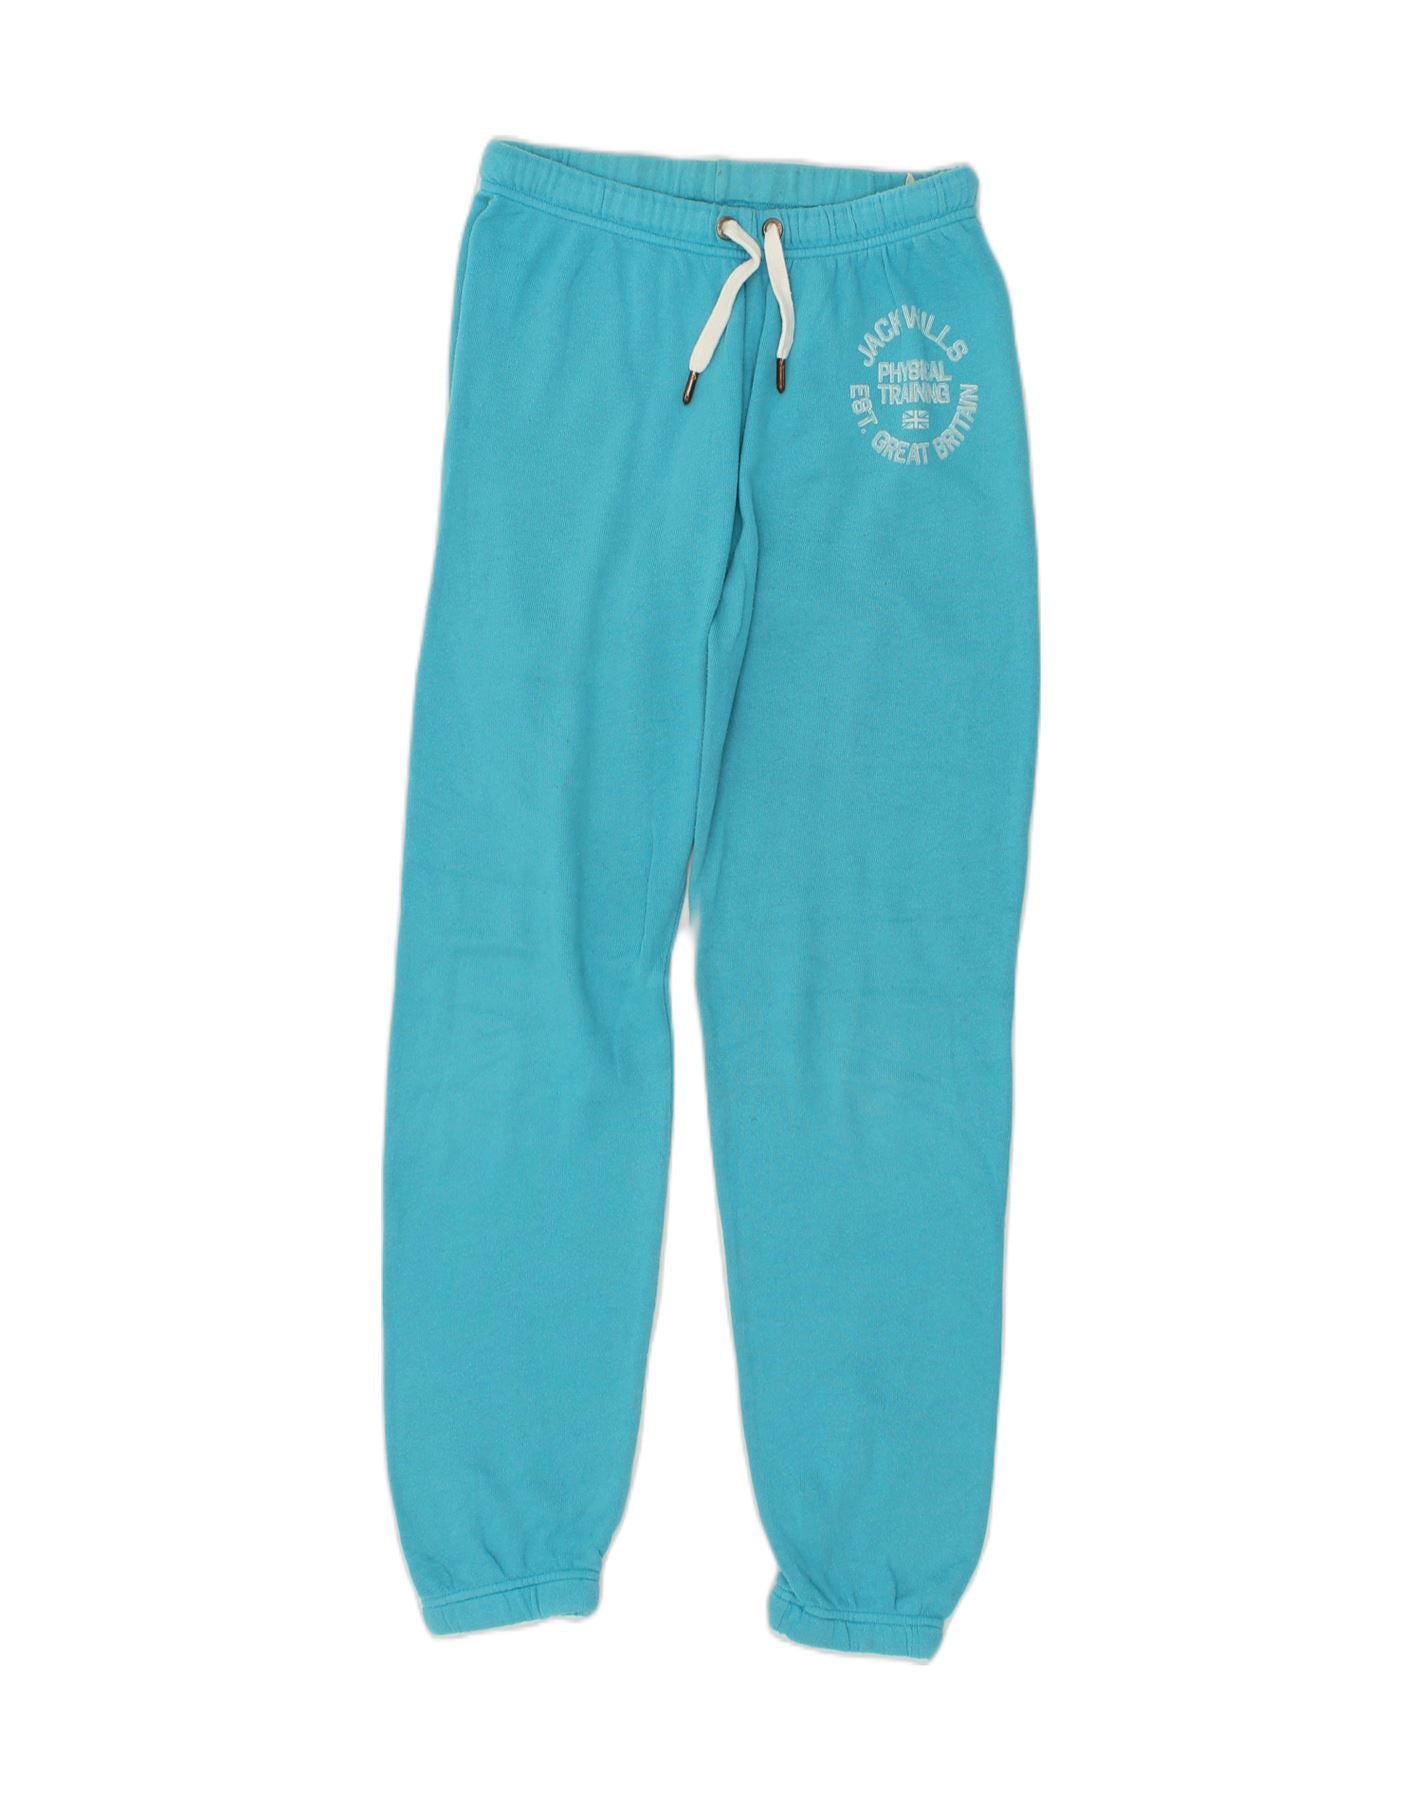 JACK WILLS Womens Tracksuit Trousers Joggers UK 6 XS Turquoise Cotton, Vintage & Second-Hand Clothing Online